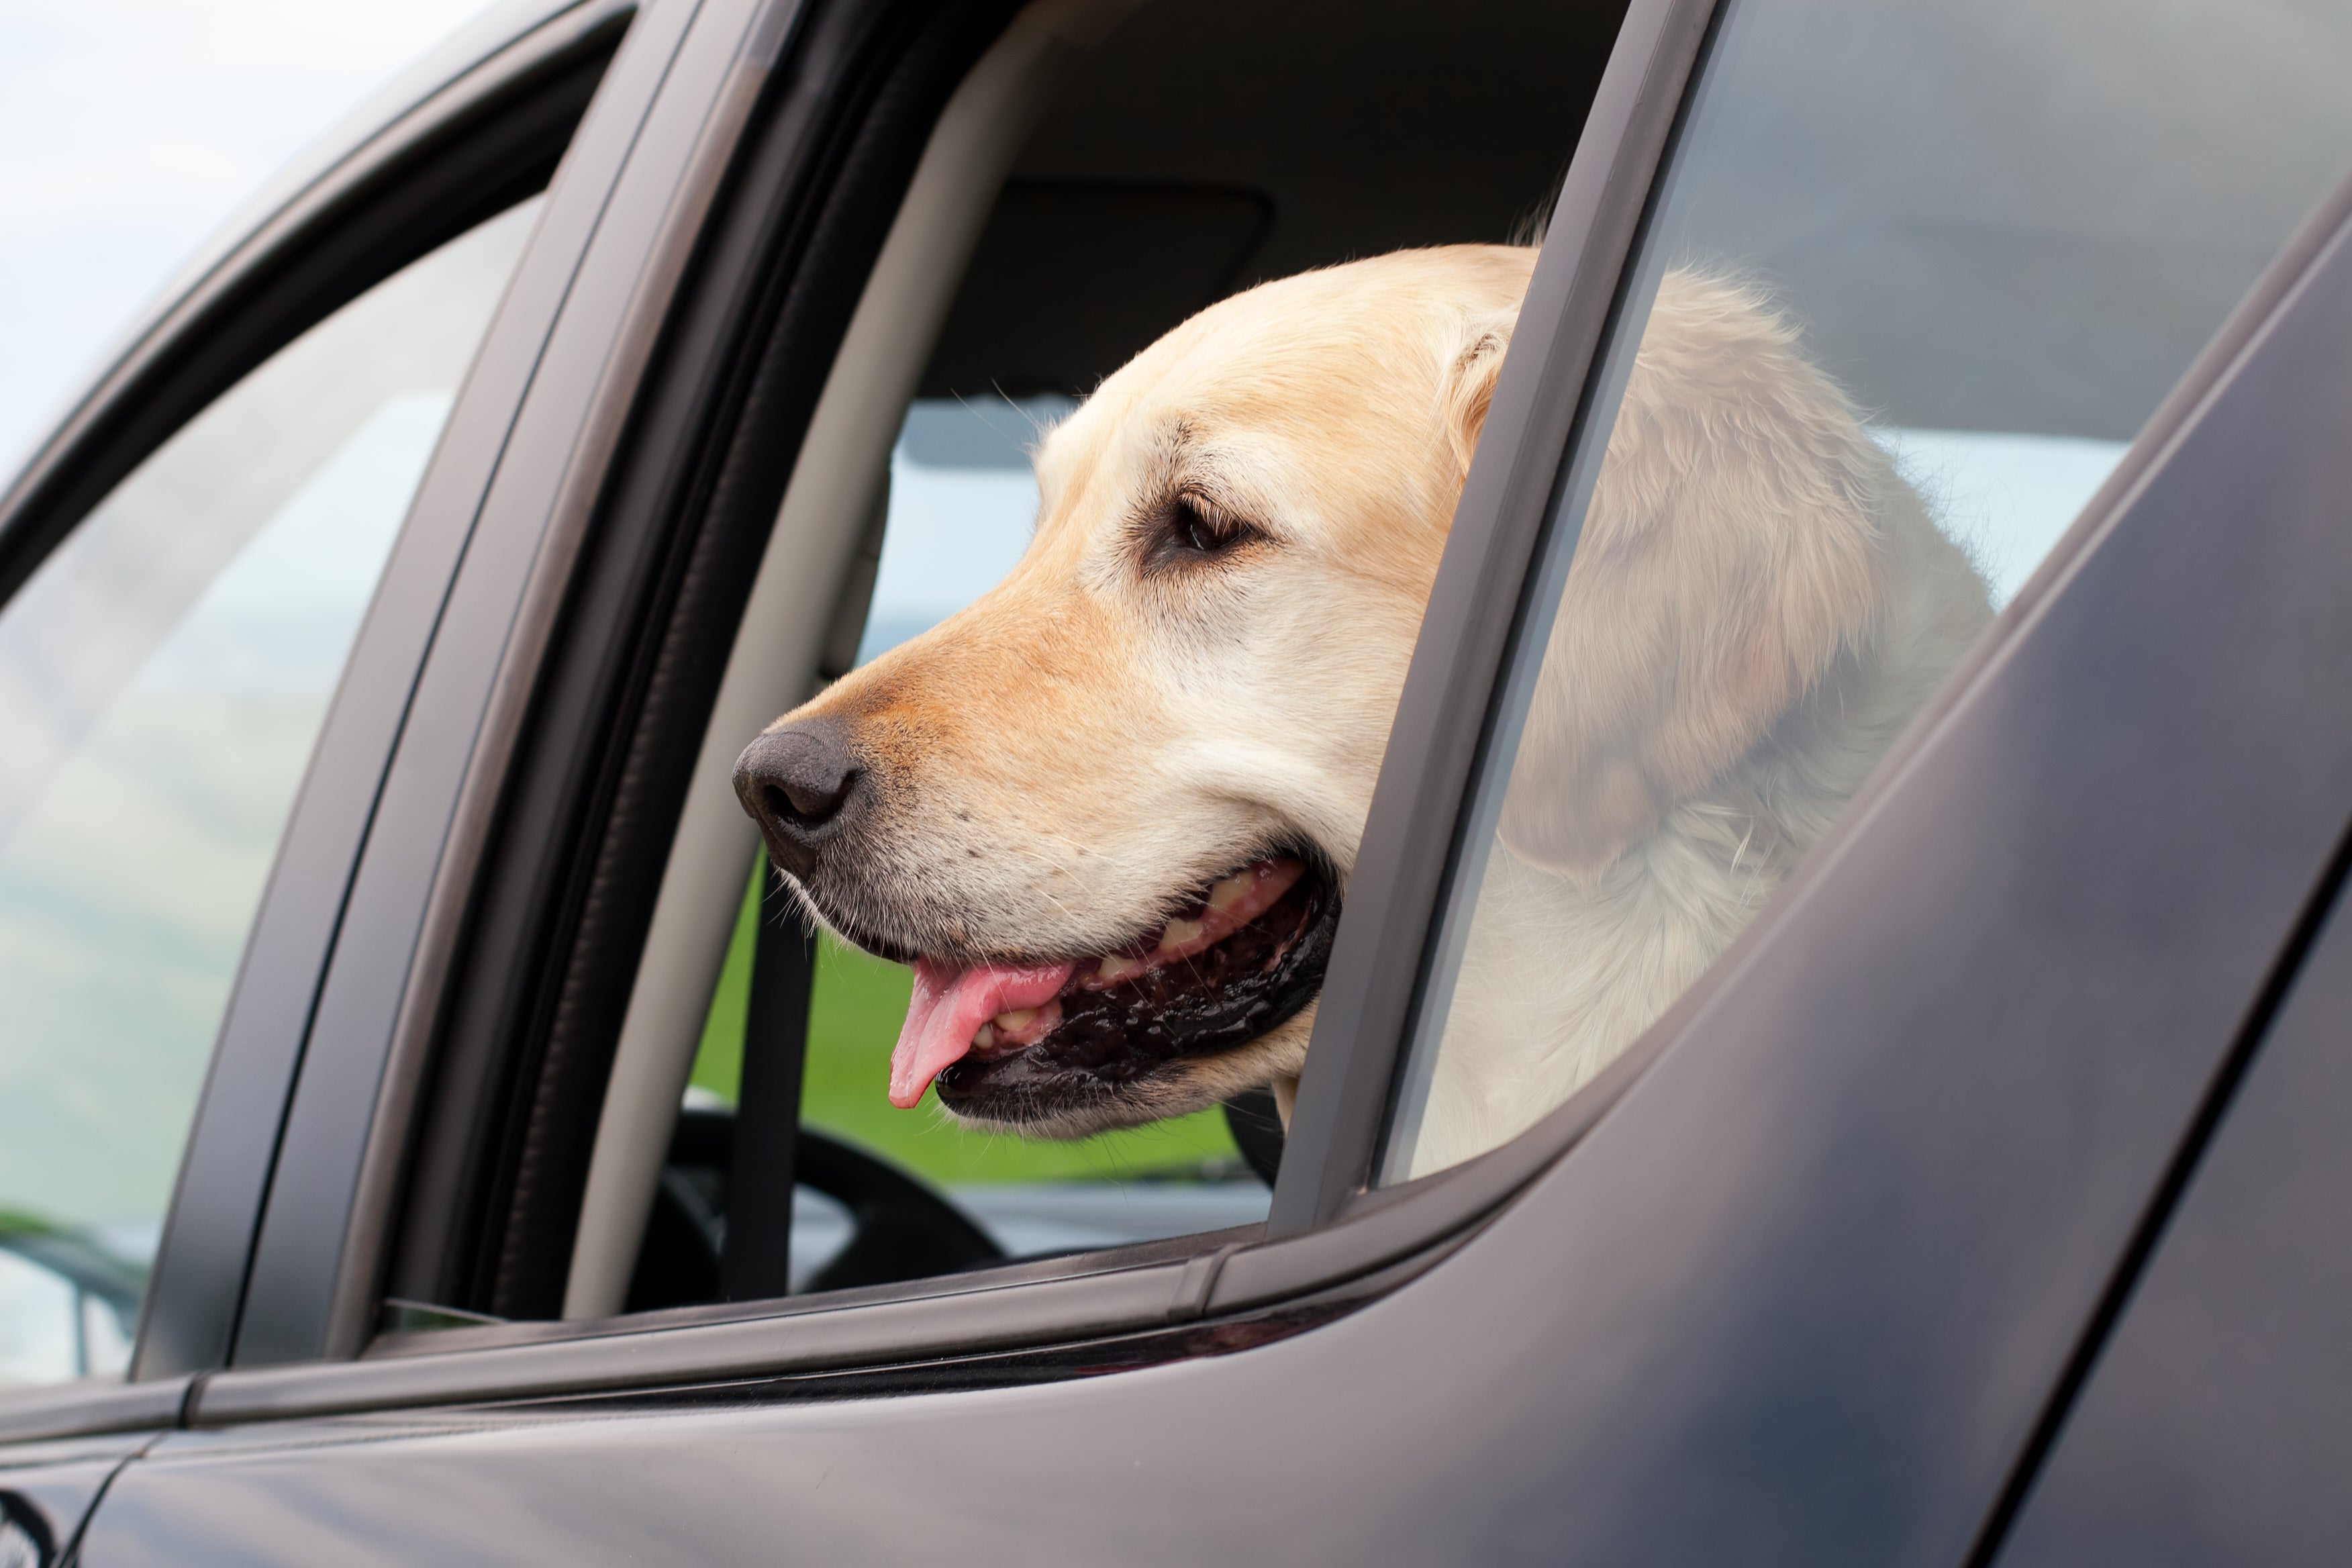 File image: A dog is seen in a parked car. A police academy in China’s Liaoning province will auction off 54 ‘coward’ dogs that failed to qualify for its training programme